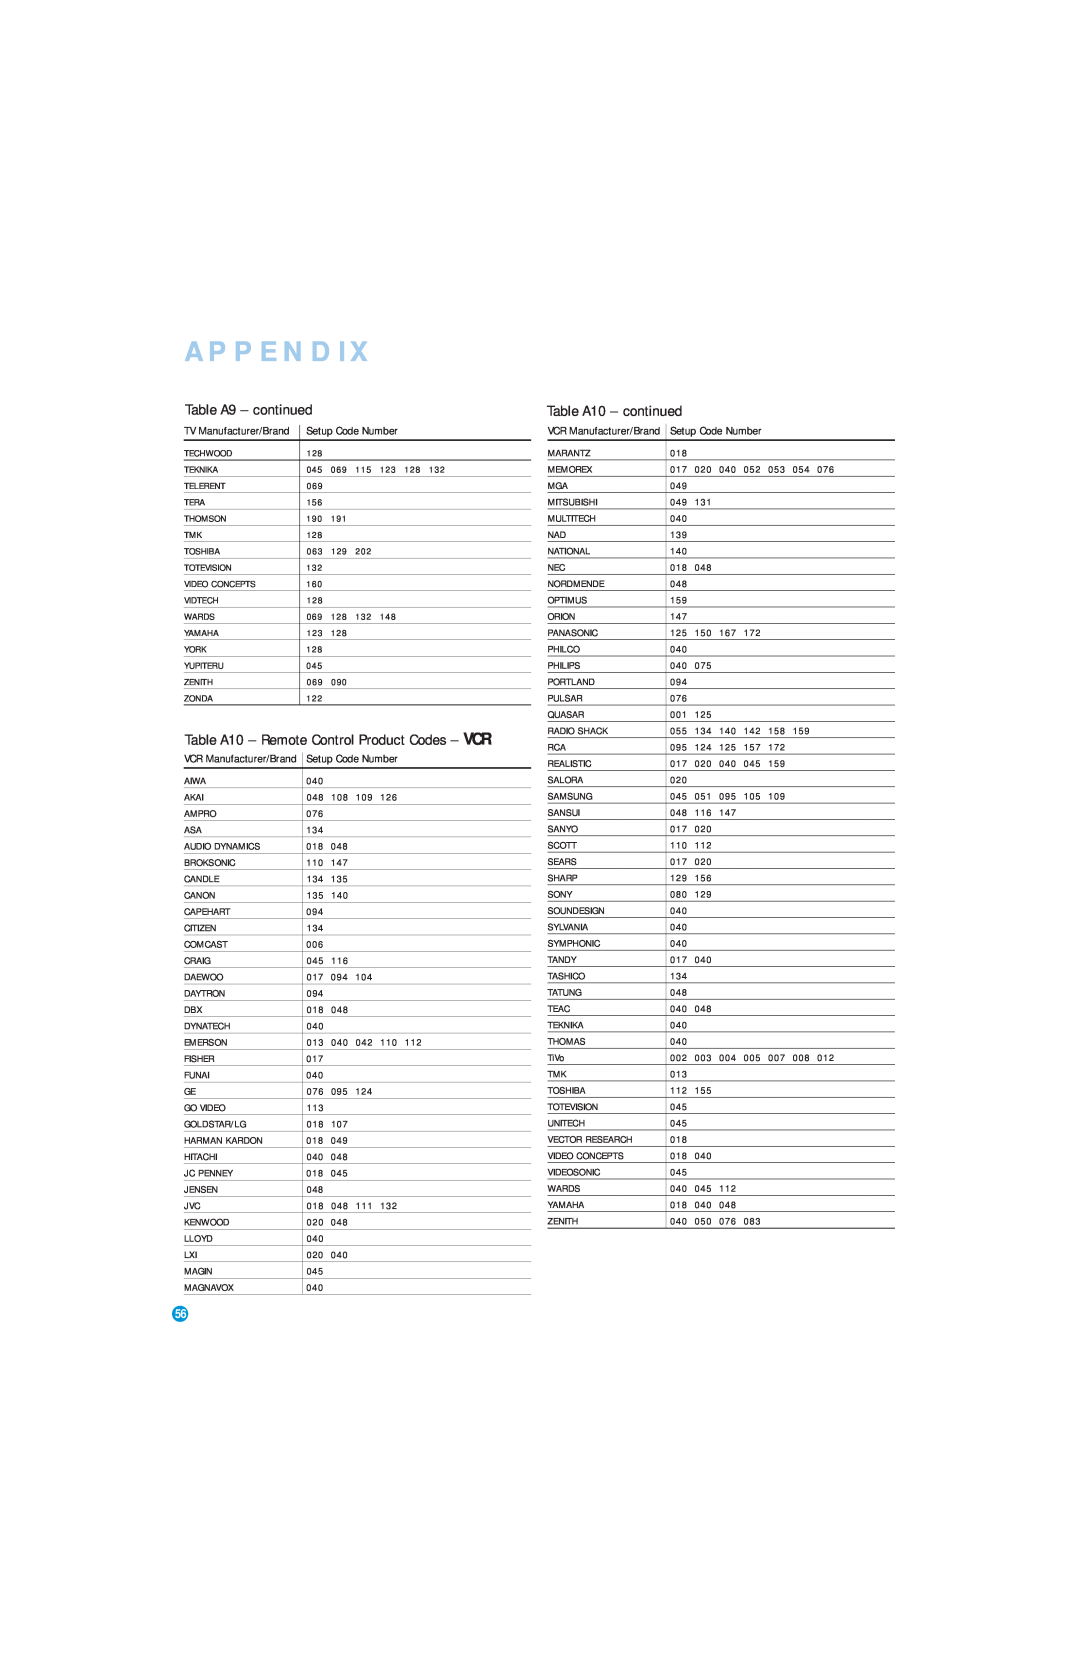 Harman-Kardon AVR 146 owner manual Table A9 - continued, Table A10 - continued, Appendix 